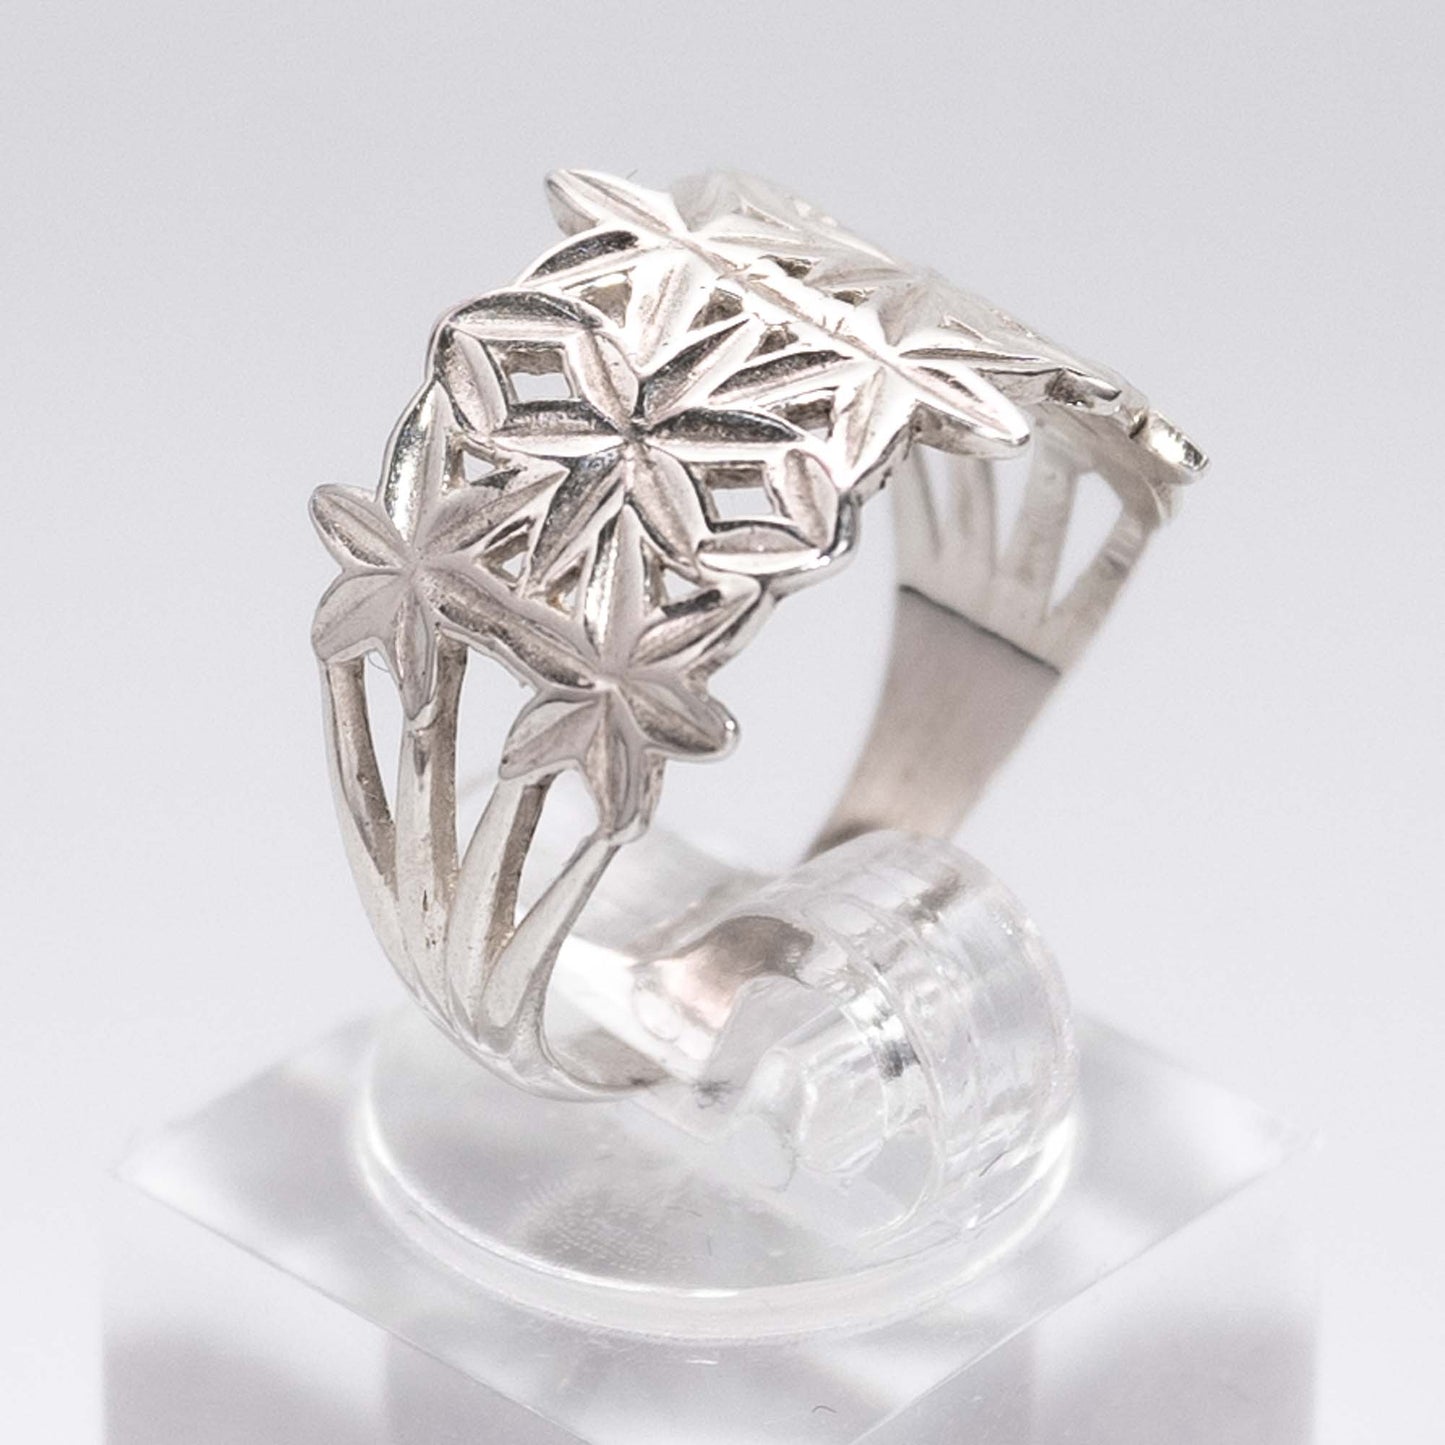 Snow- 925 Silver ring